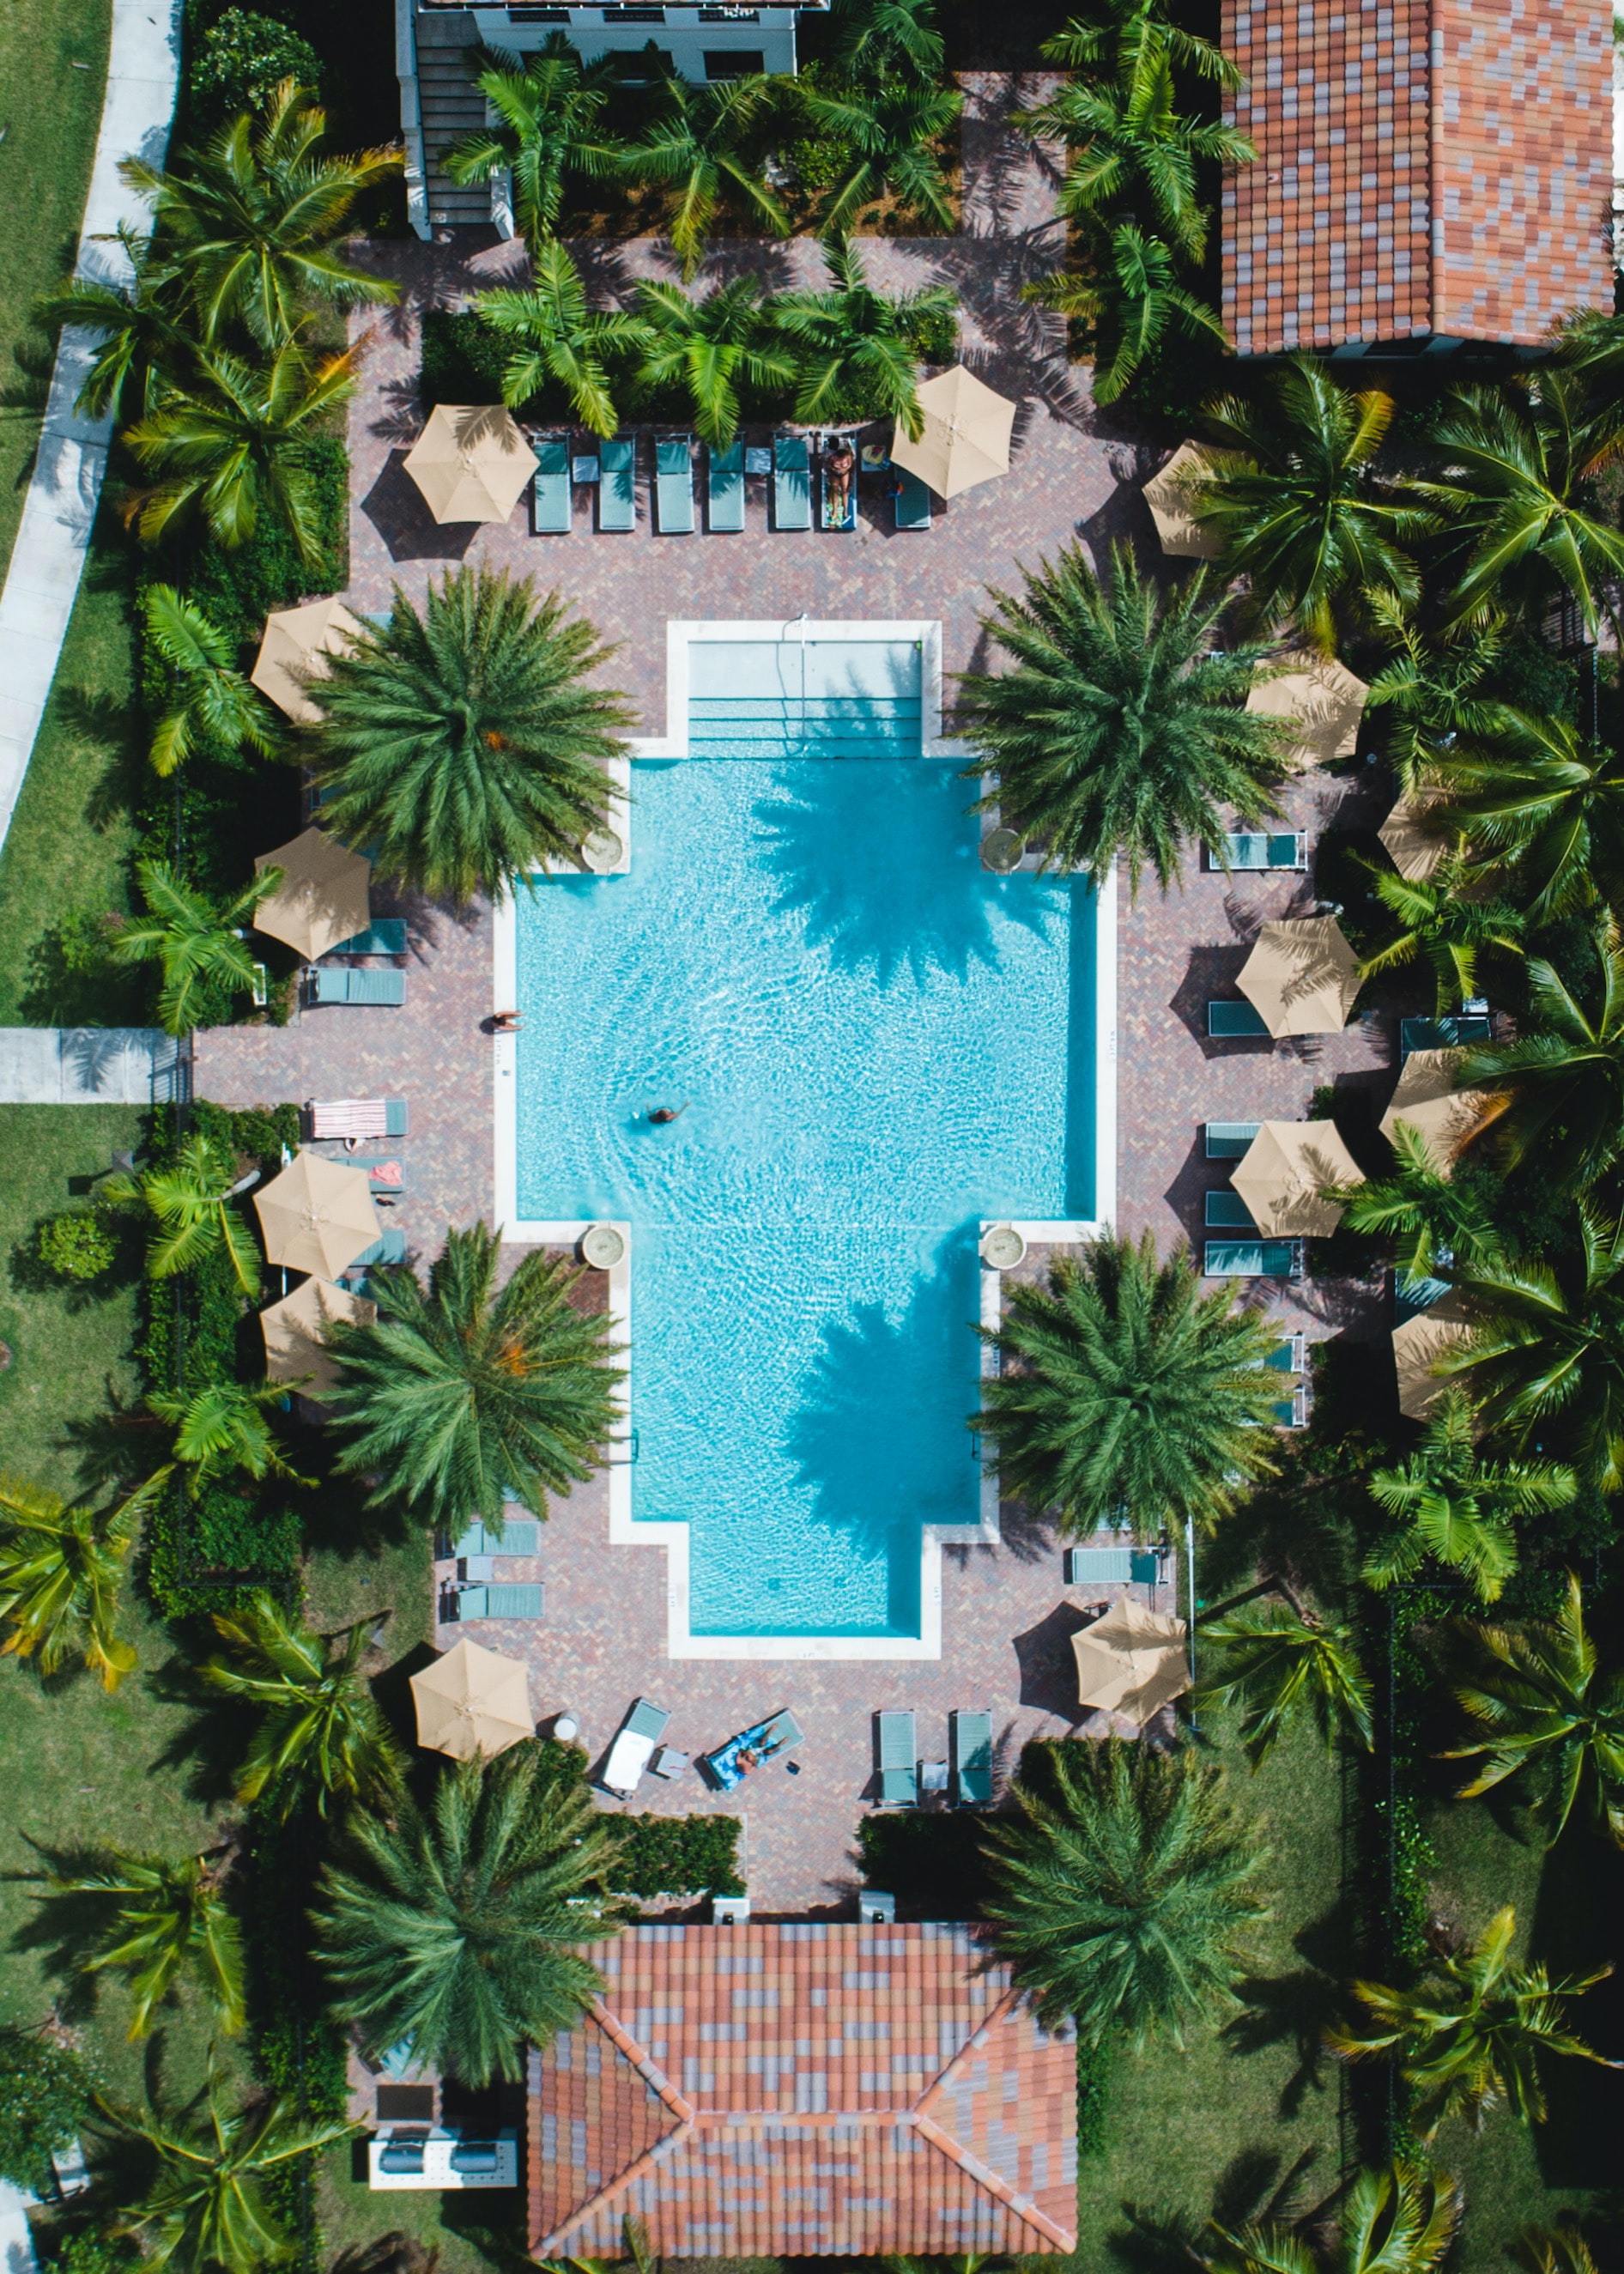 Free HD view from above, palms, pool, miscellanea, miscellaneous